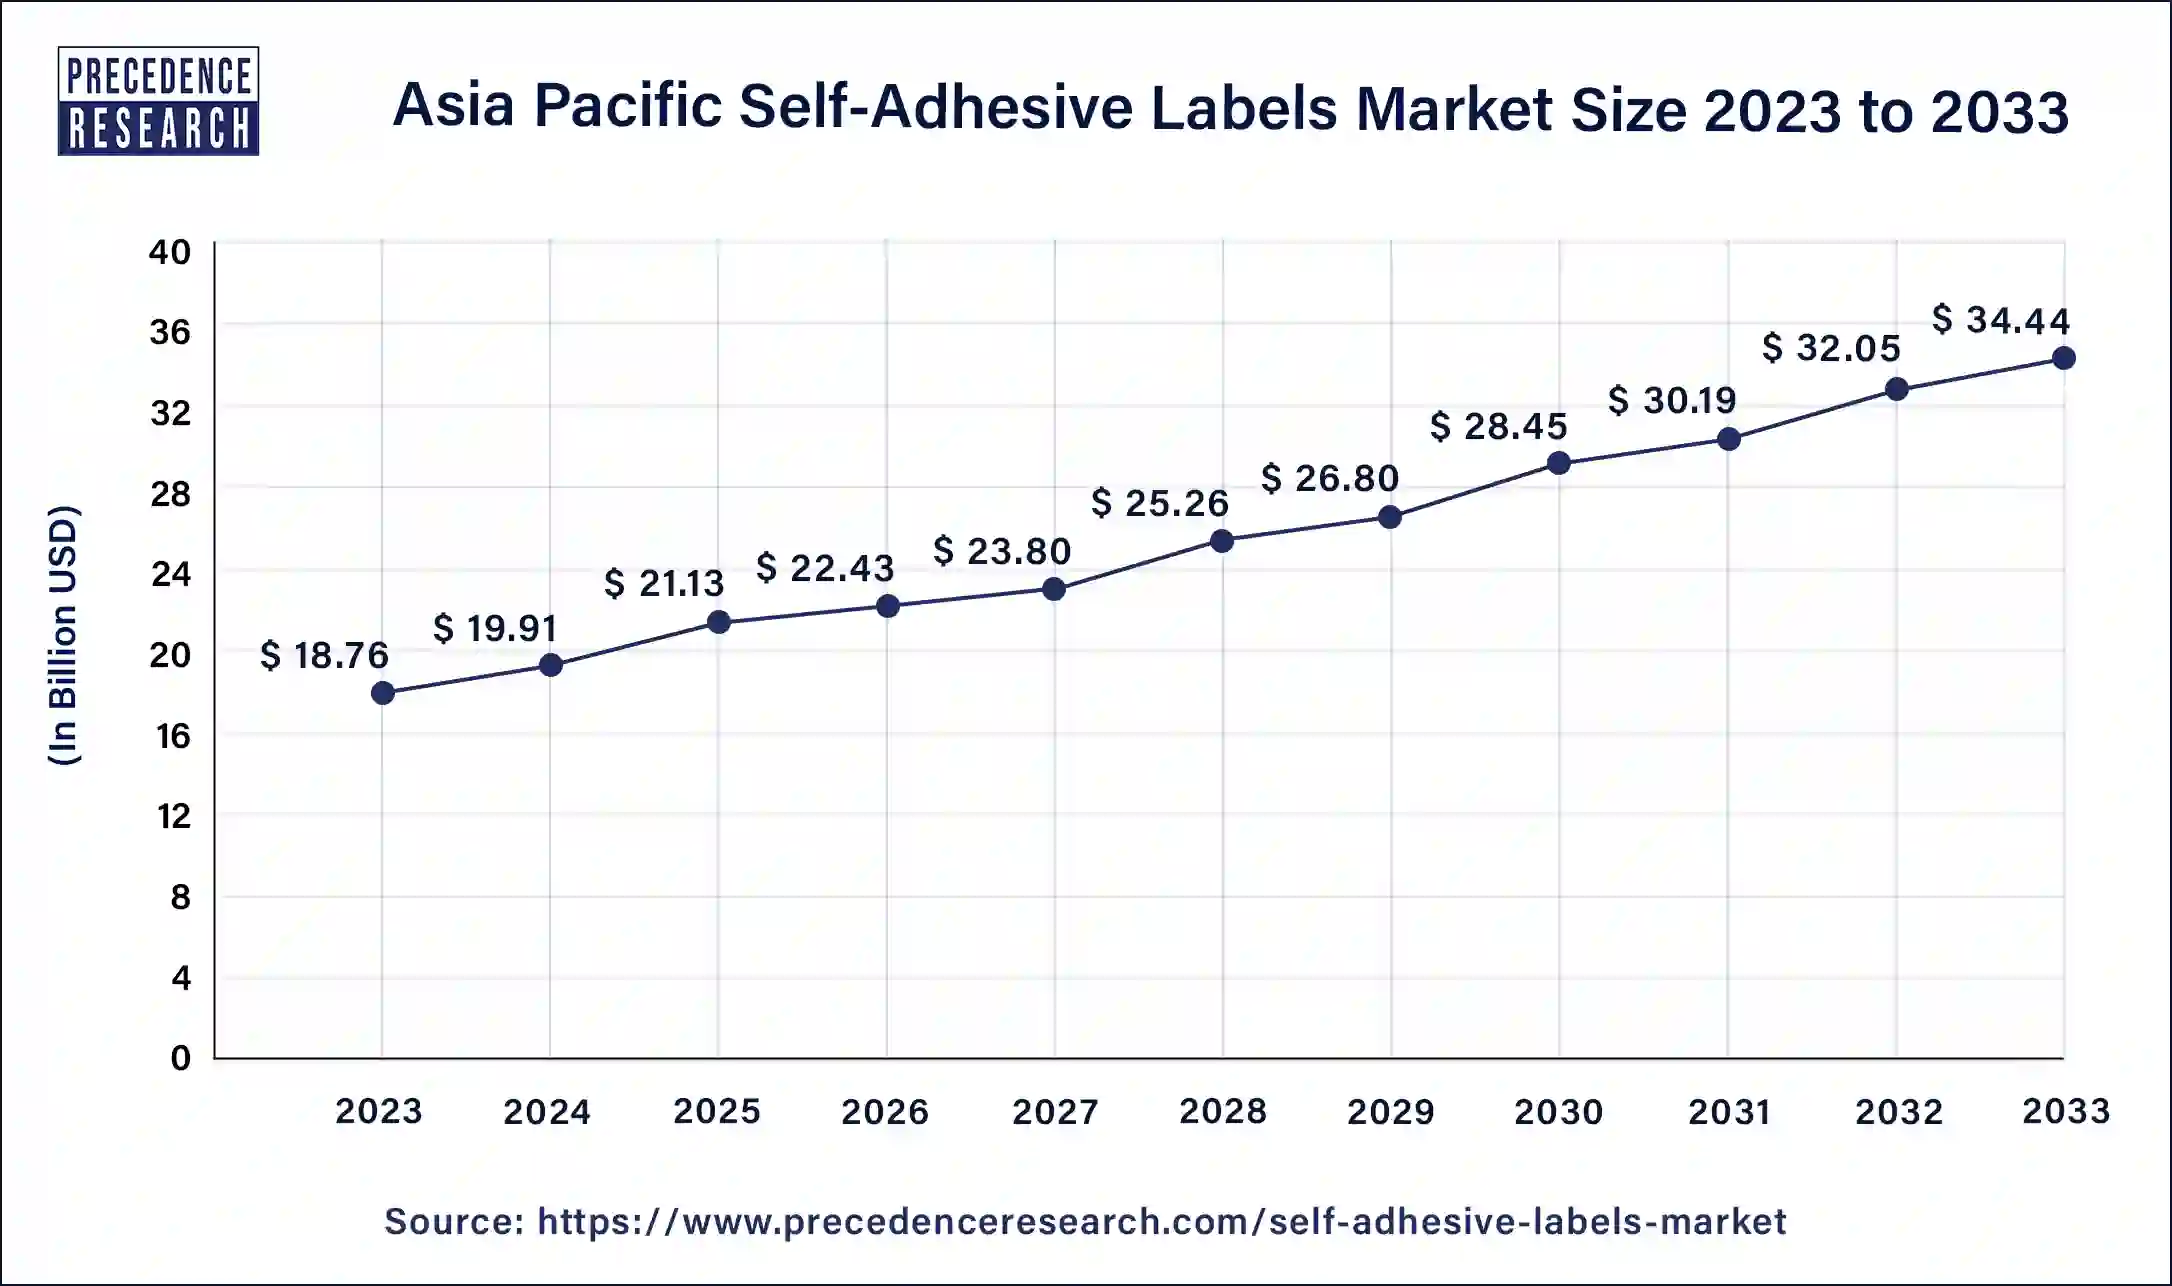 Asia Pacific Self-Adhesive Labels Market Size 2024 to 2033